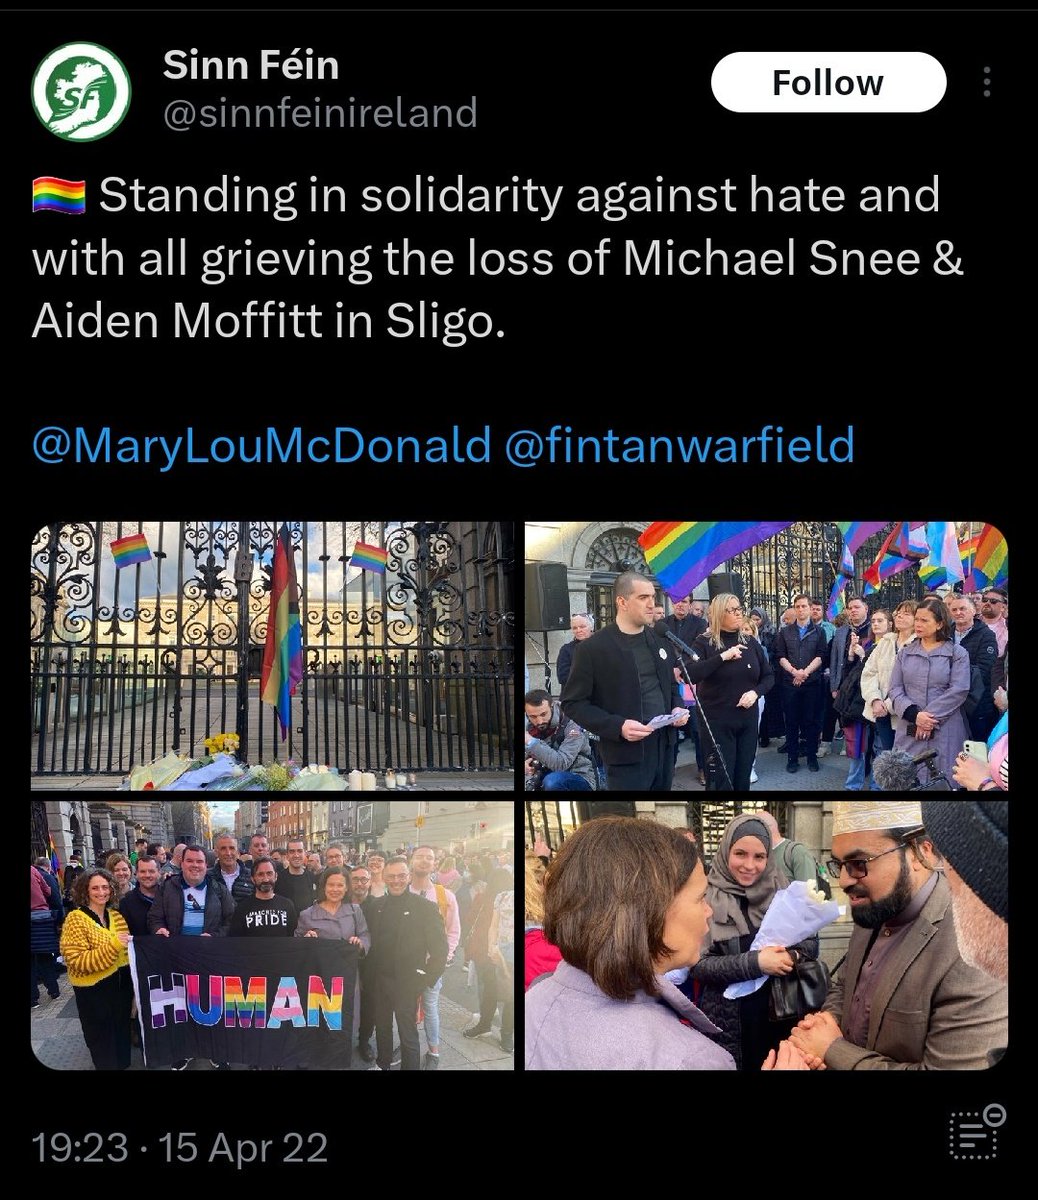 Following the Sligo murders, Sinn Féin leader Marylou McDonald gathered with Al Qadri for a photo op / vigil. 

Irish men were slaughtered by a muslim refugee during Ramadan, and instead of calling it out, Sinn Féin used it as an opportunity to embrace Islam.